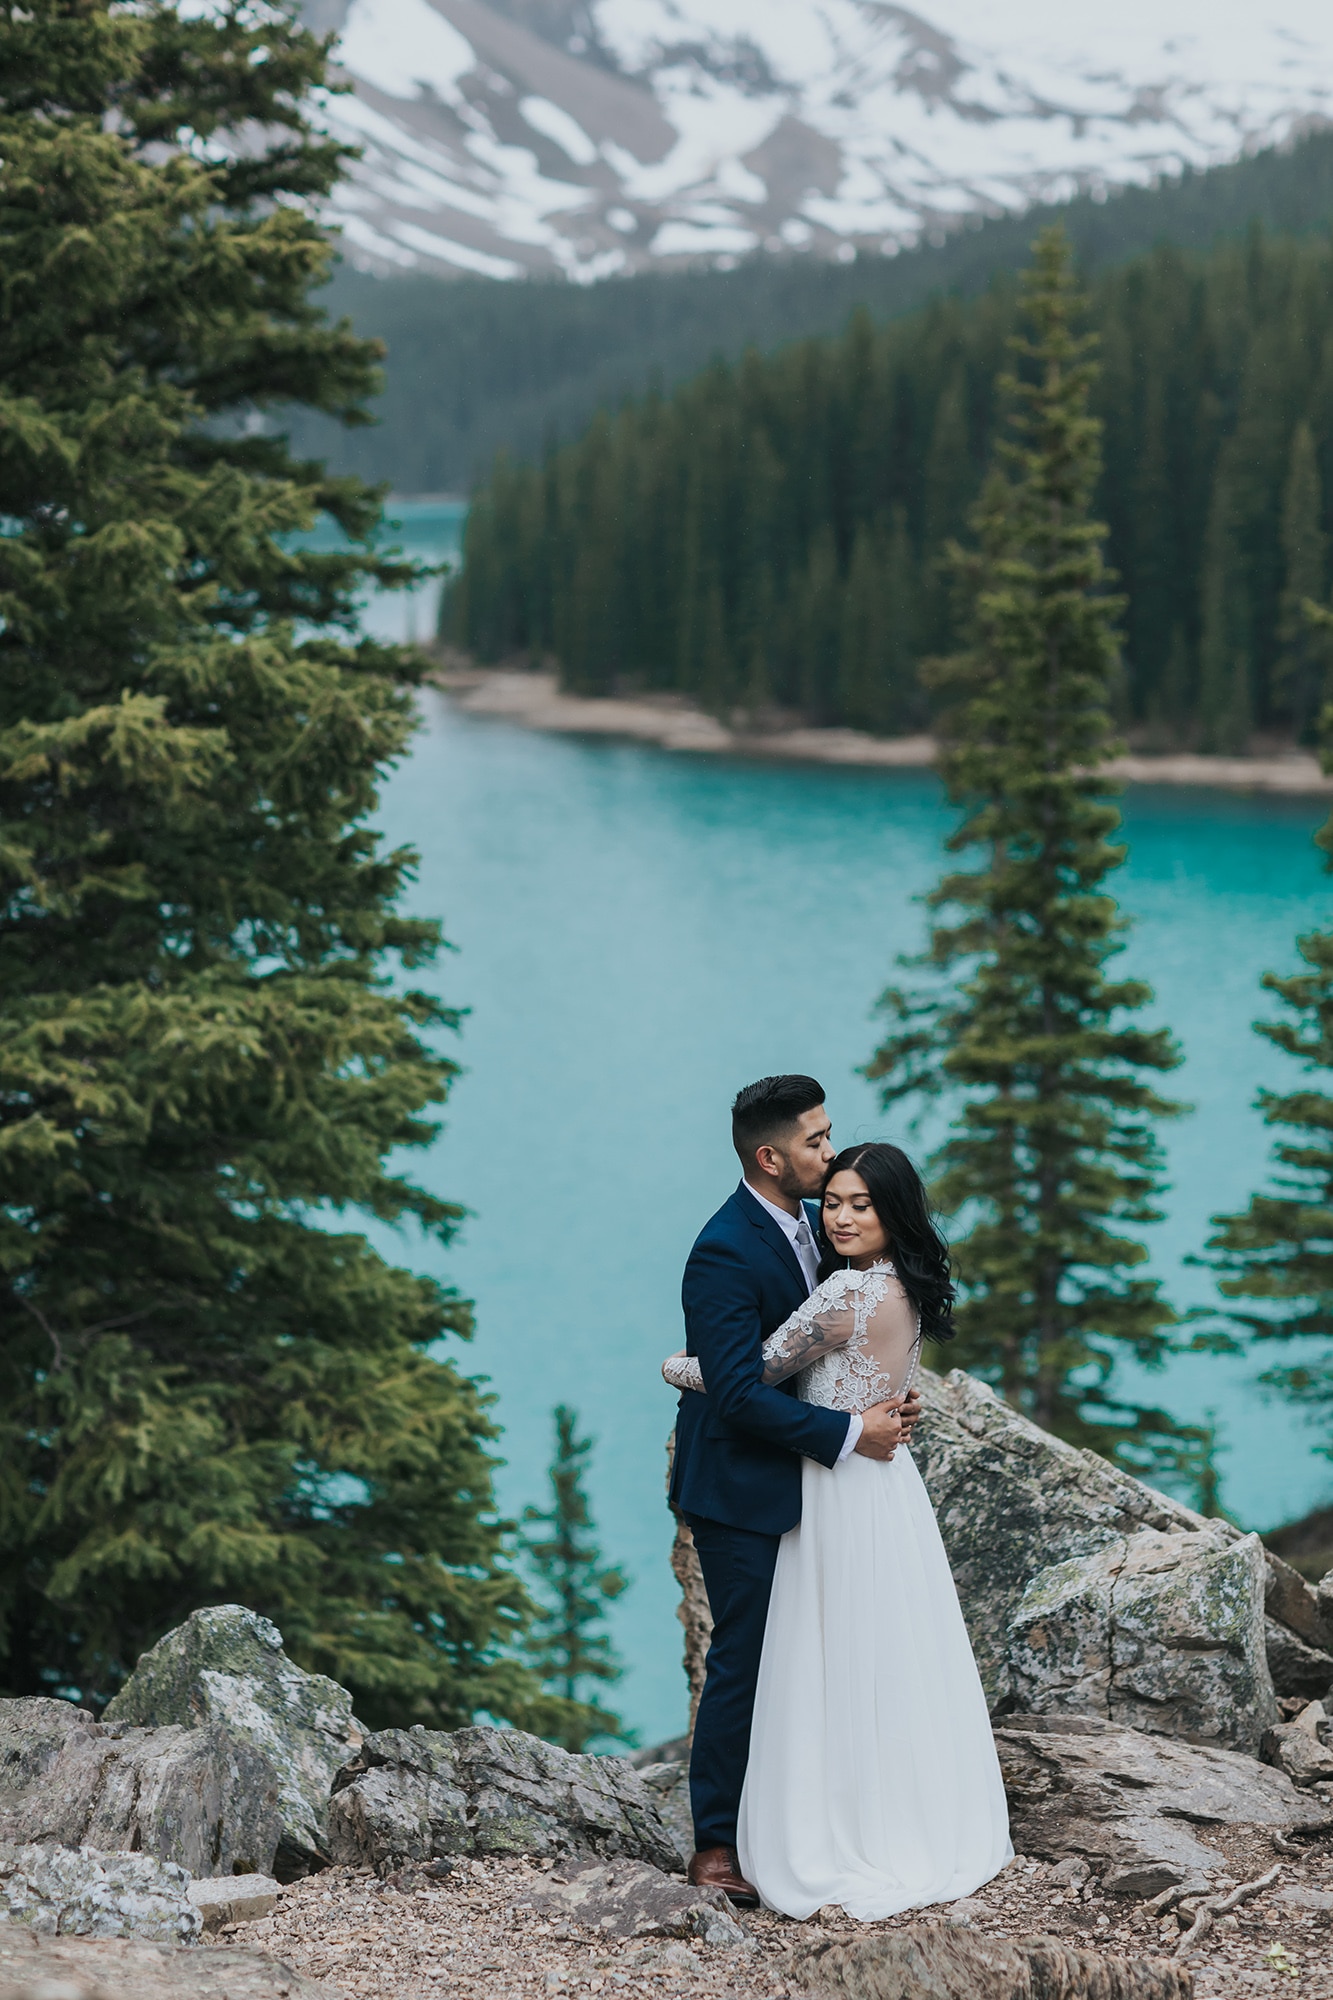 mountain wedding in late spring at the Rock Pile in Moraine Lake with snowy mountains & turquoise water